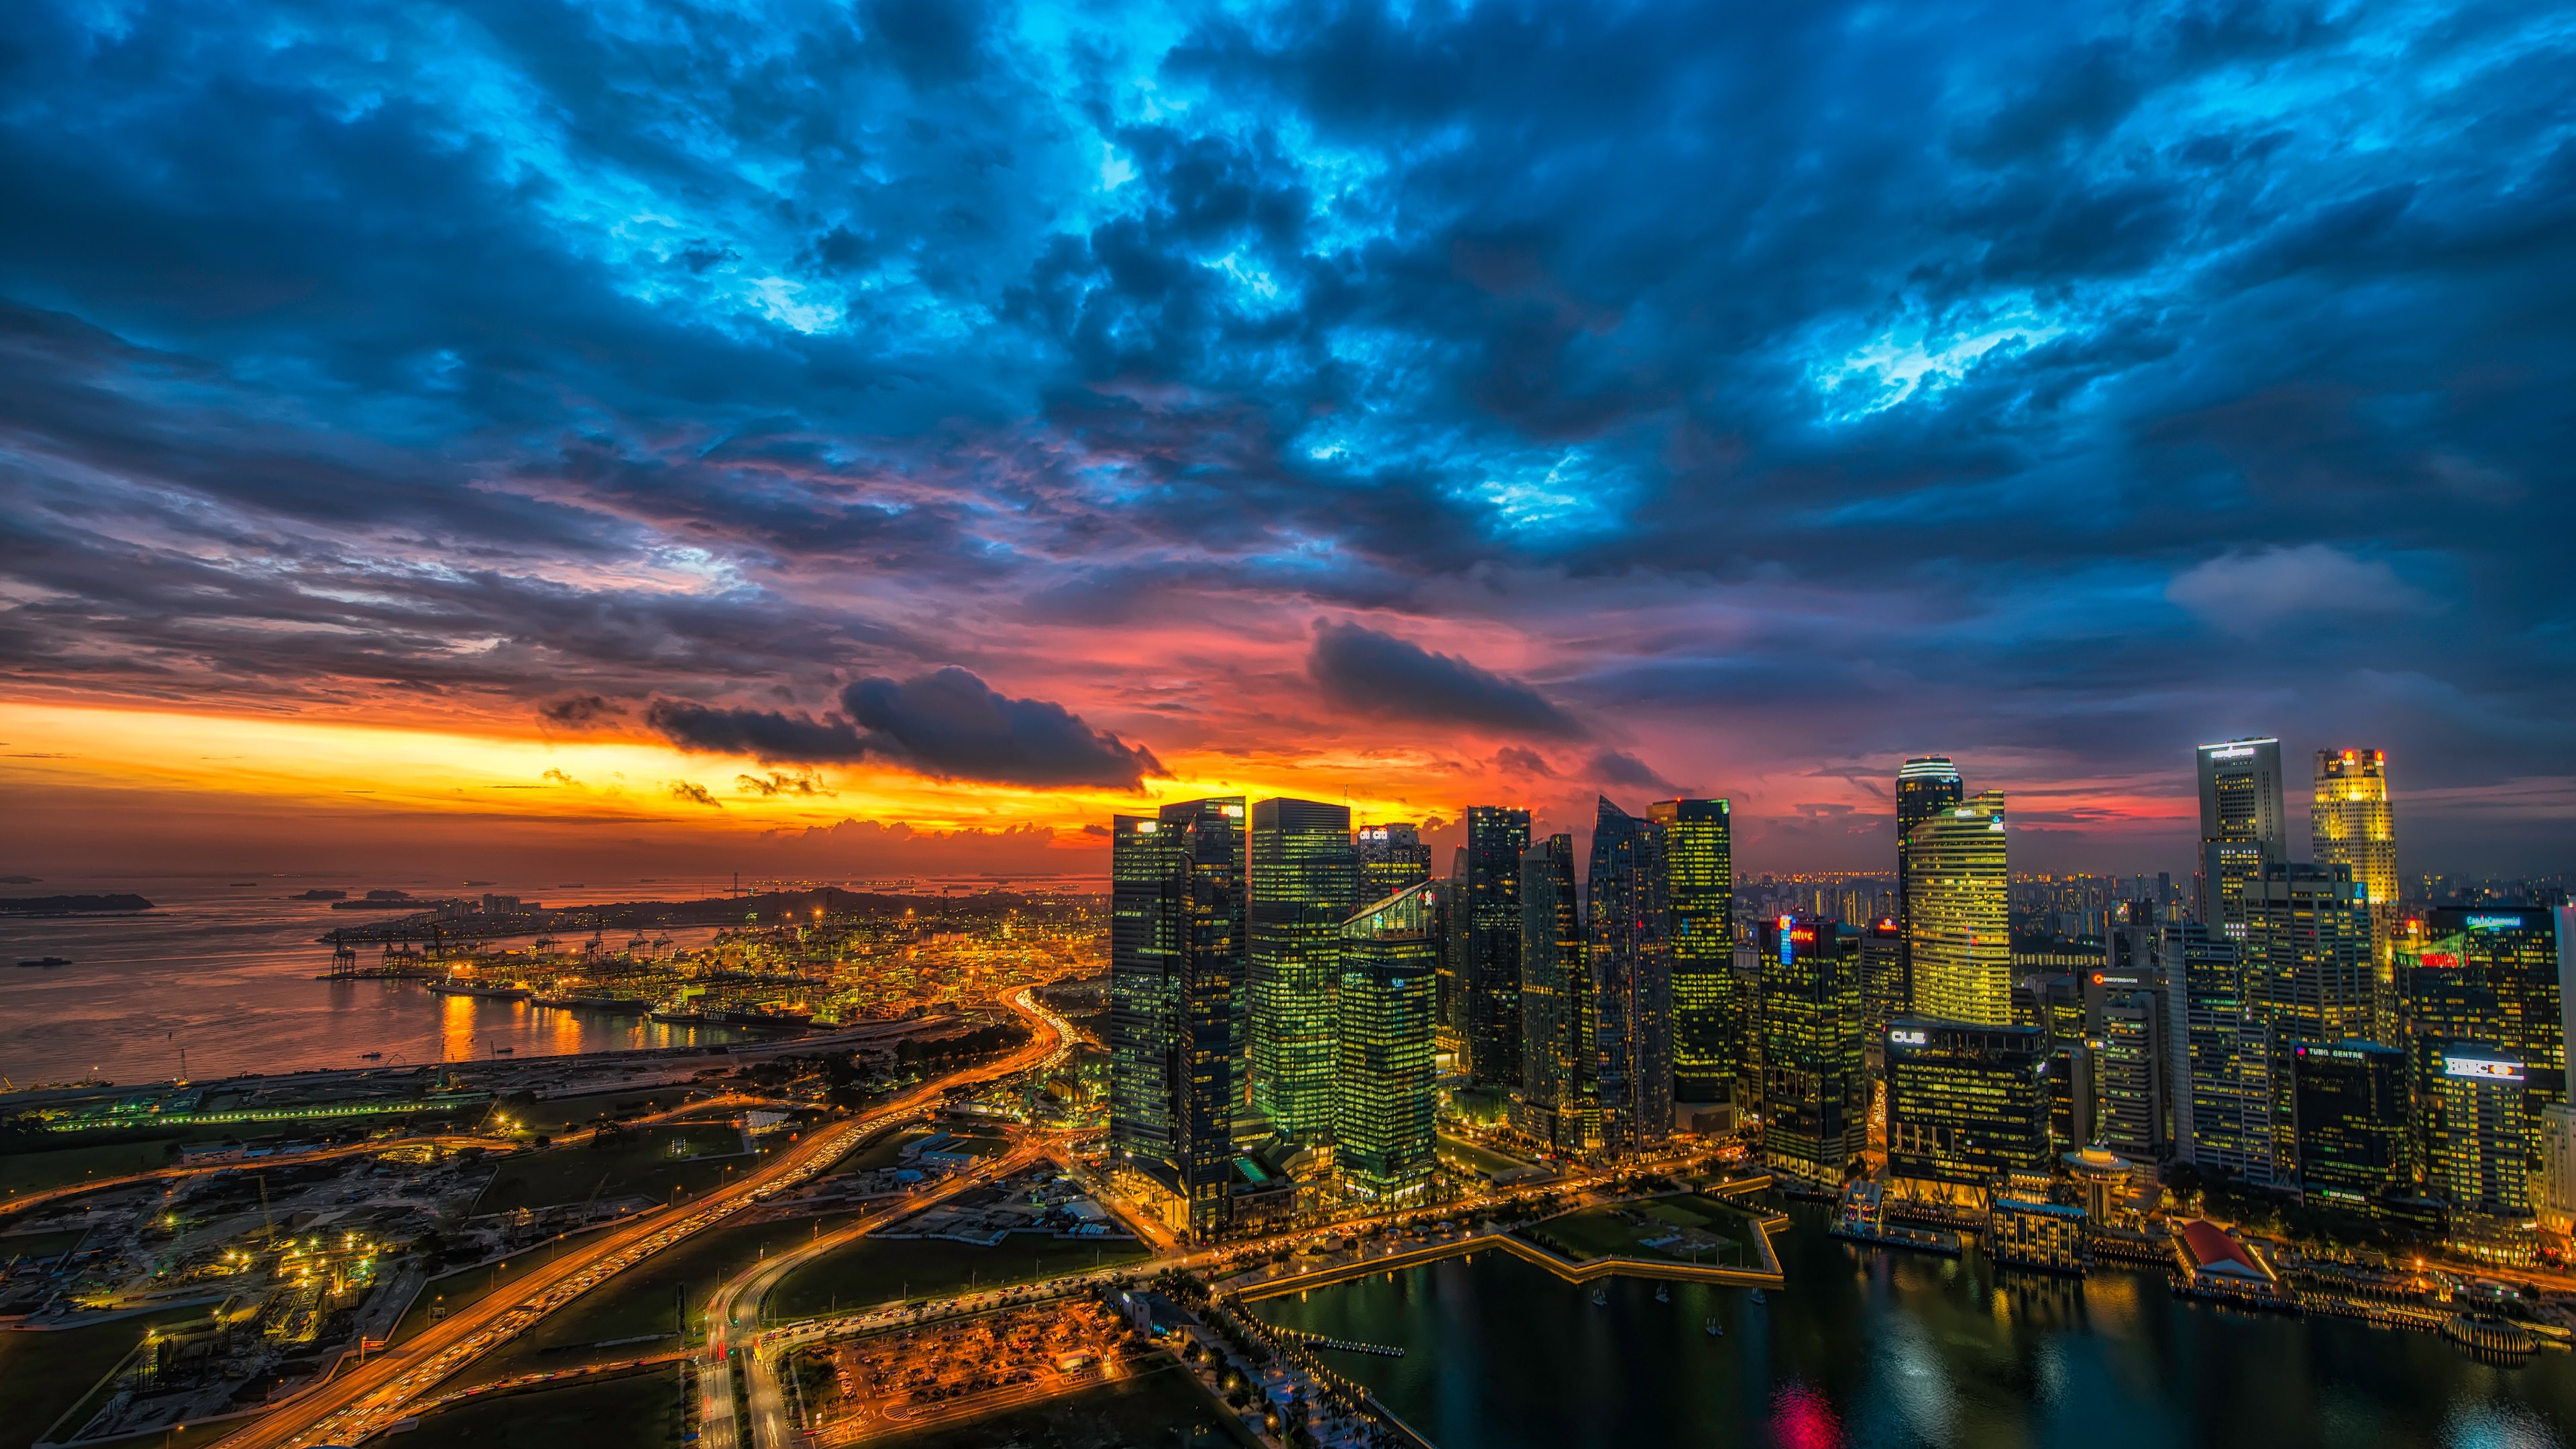 Panoramic With Architecture Of Singapore HD Wallpaper 4k